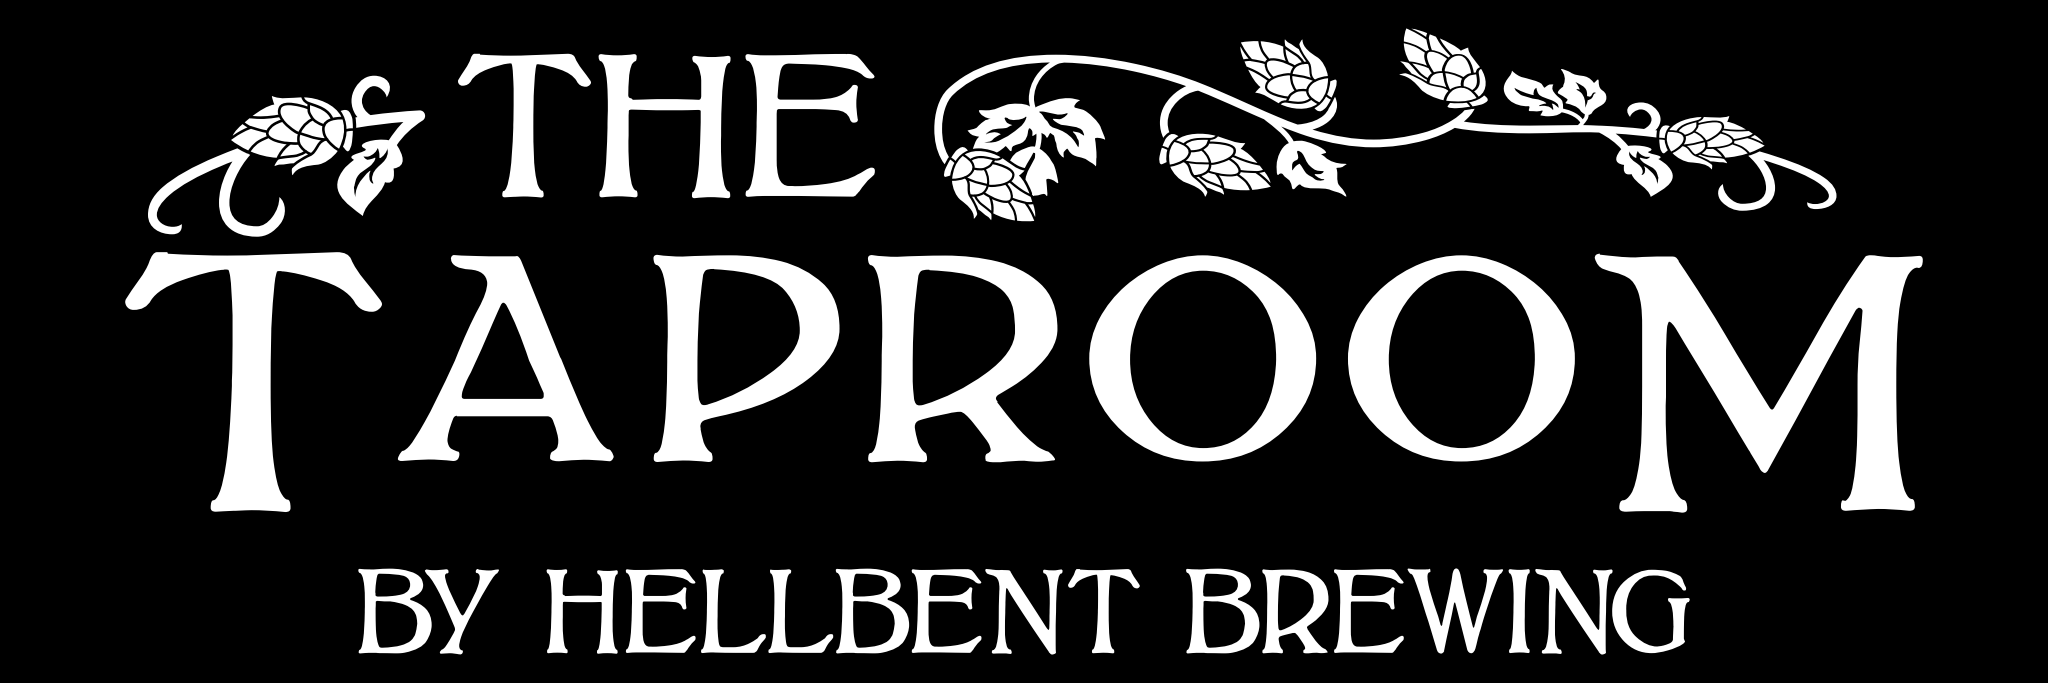 The Taproom by Hellbent